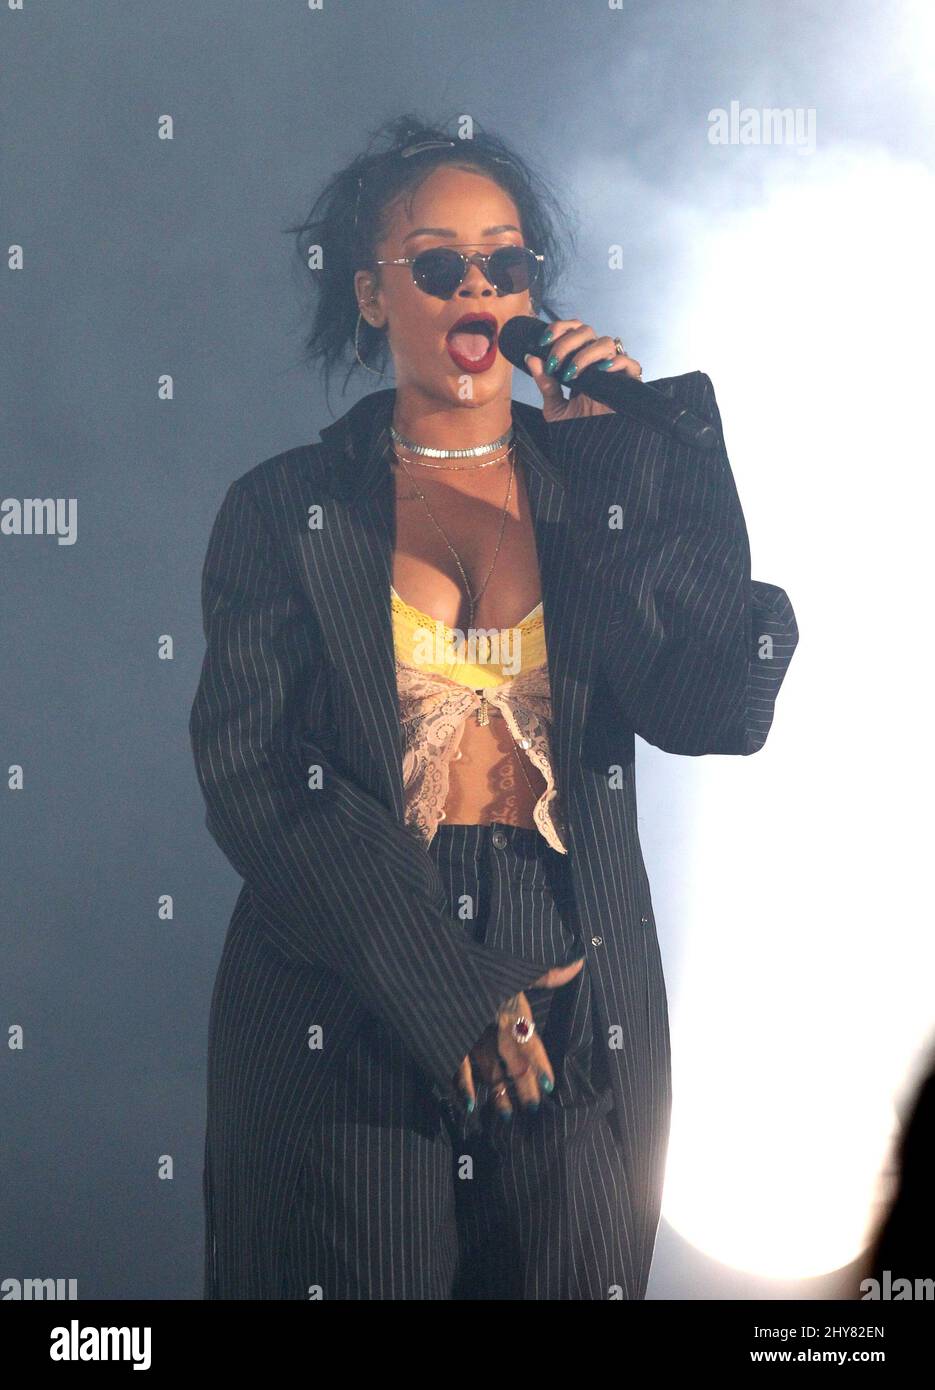 Rihanna CBS Radio's Third Annual 'We Can Survive' 2015 held at the Hollywood Bowl Stock Photo